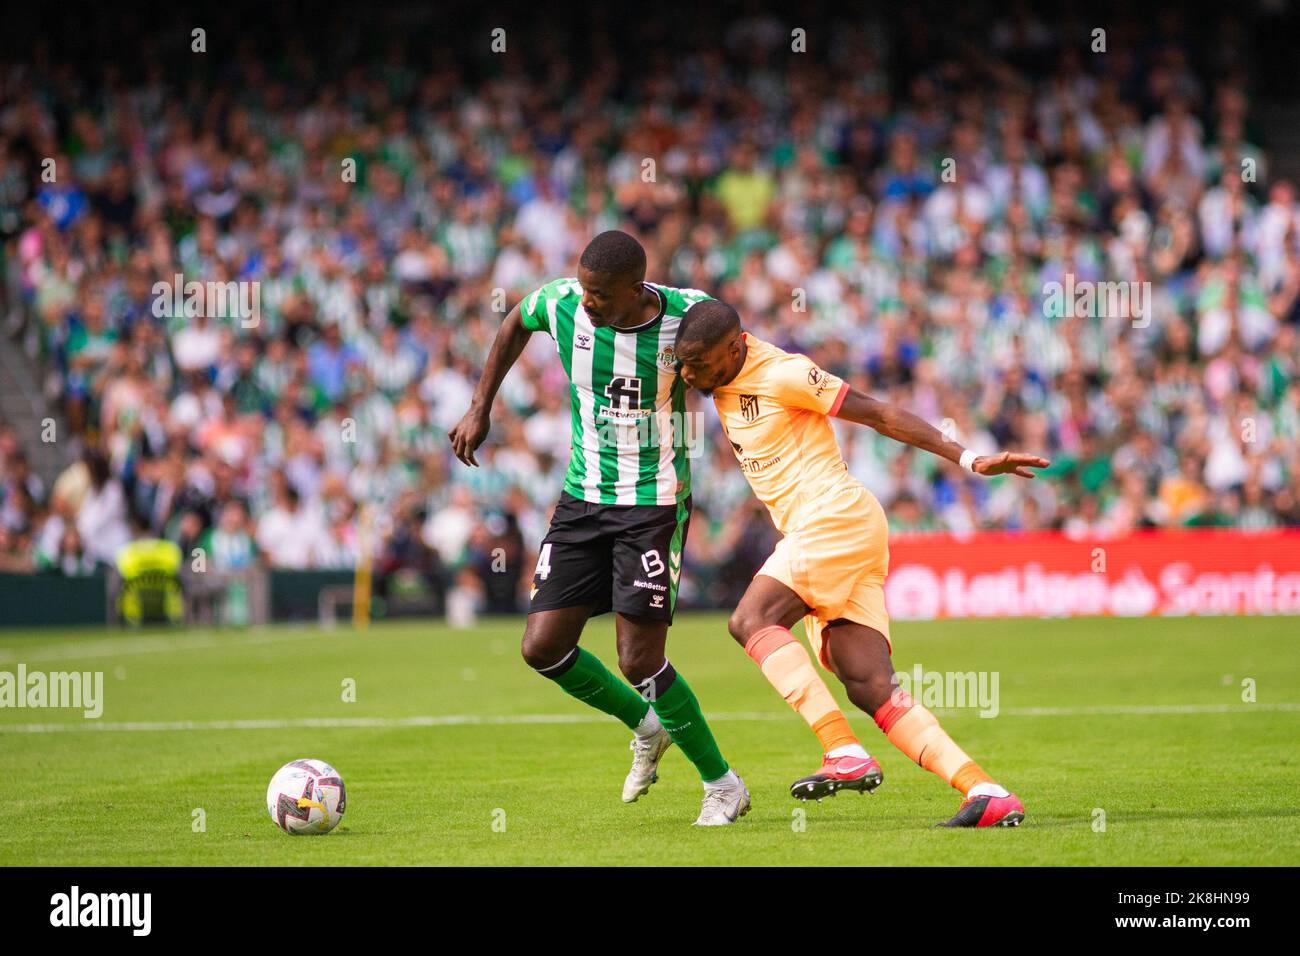 Seville, Spain. 23rd Oct, 2022. William Carvalho (L) of Real Betis and Goffrey Kondogbia (R) of Atletico de Madrid seen in action during the La Liga Santander 2022/2023 match between Real Betis and Atletico de Madrid at Benito Villamarin Stadium.(Final Score; Real Betis 1:2 Atletico de Madrid) Credit: SOPA Images Limited/Alamy Live News Stock Photo